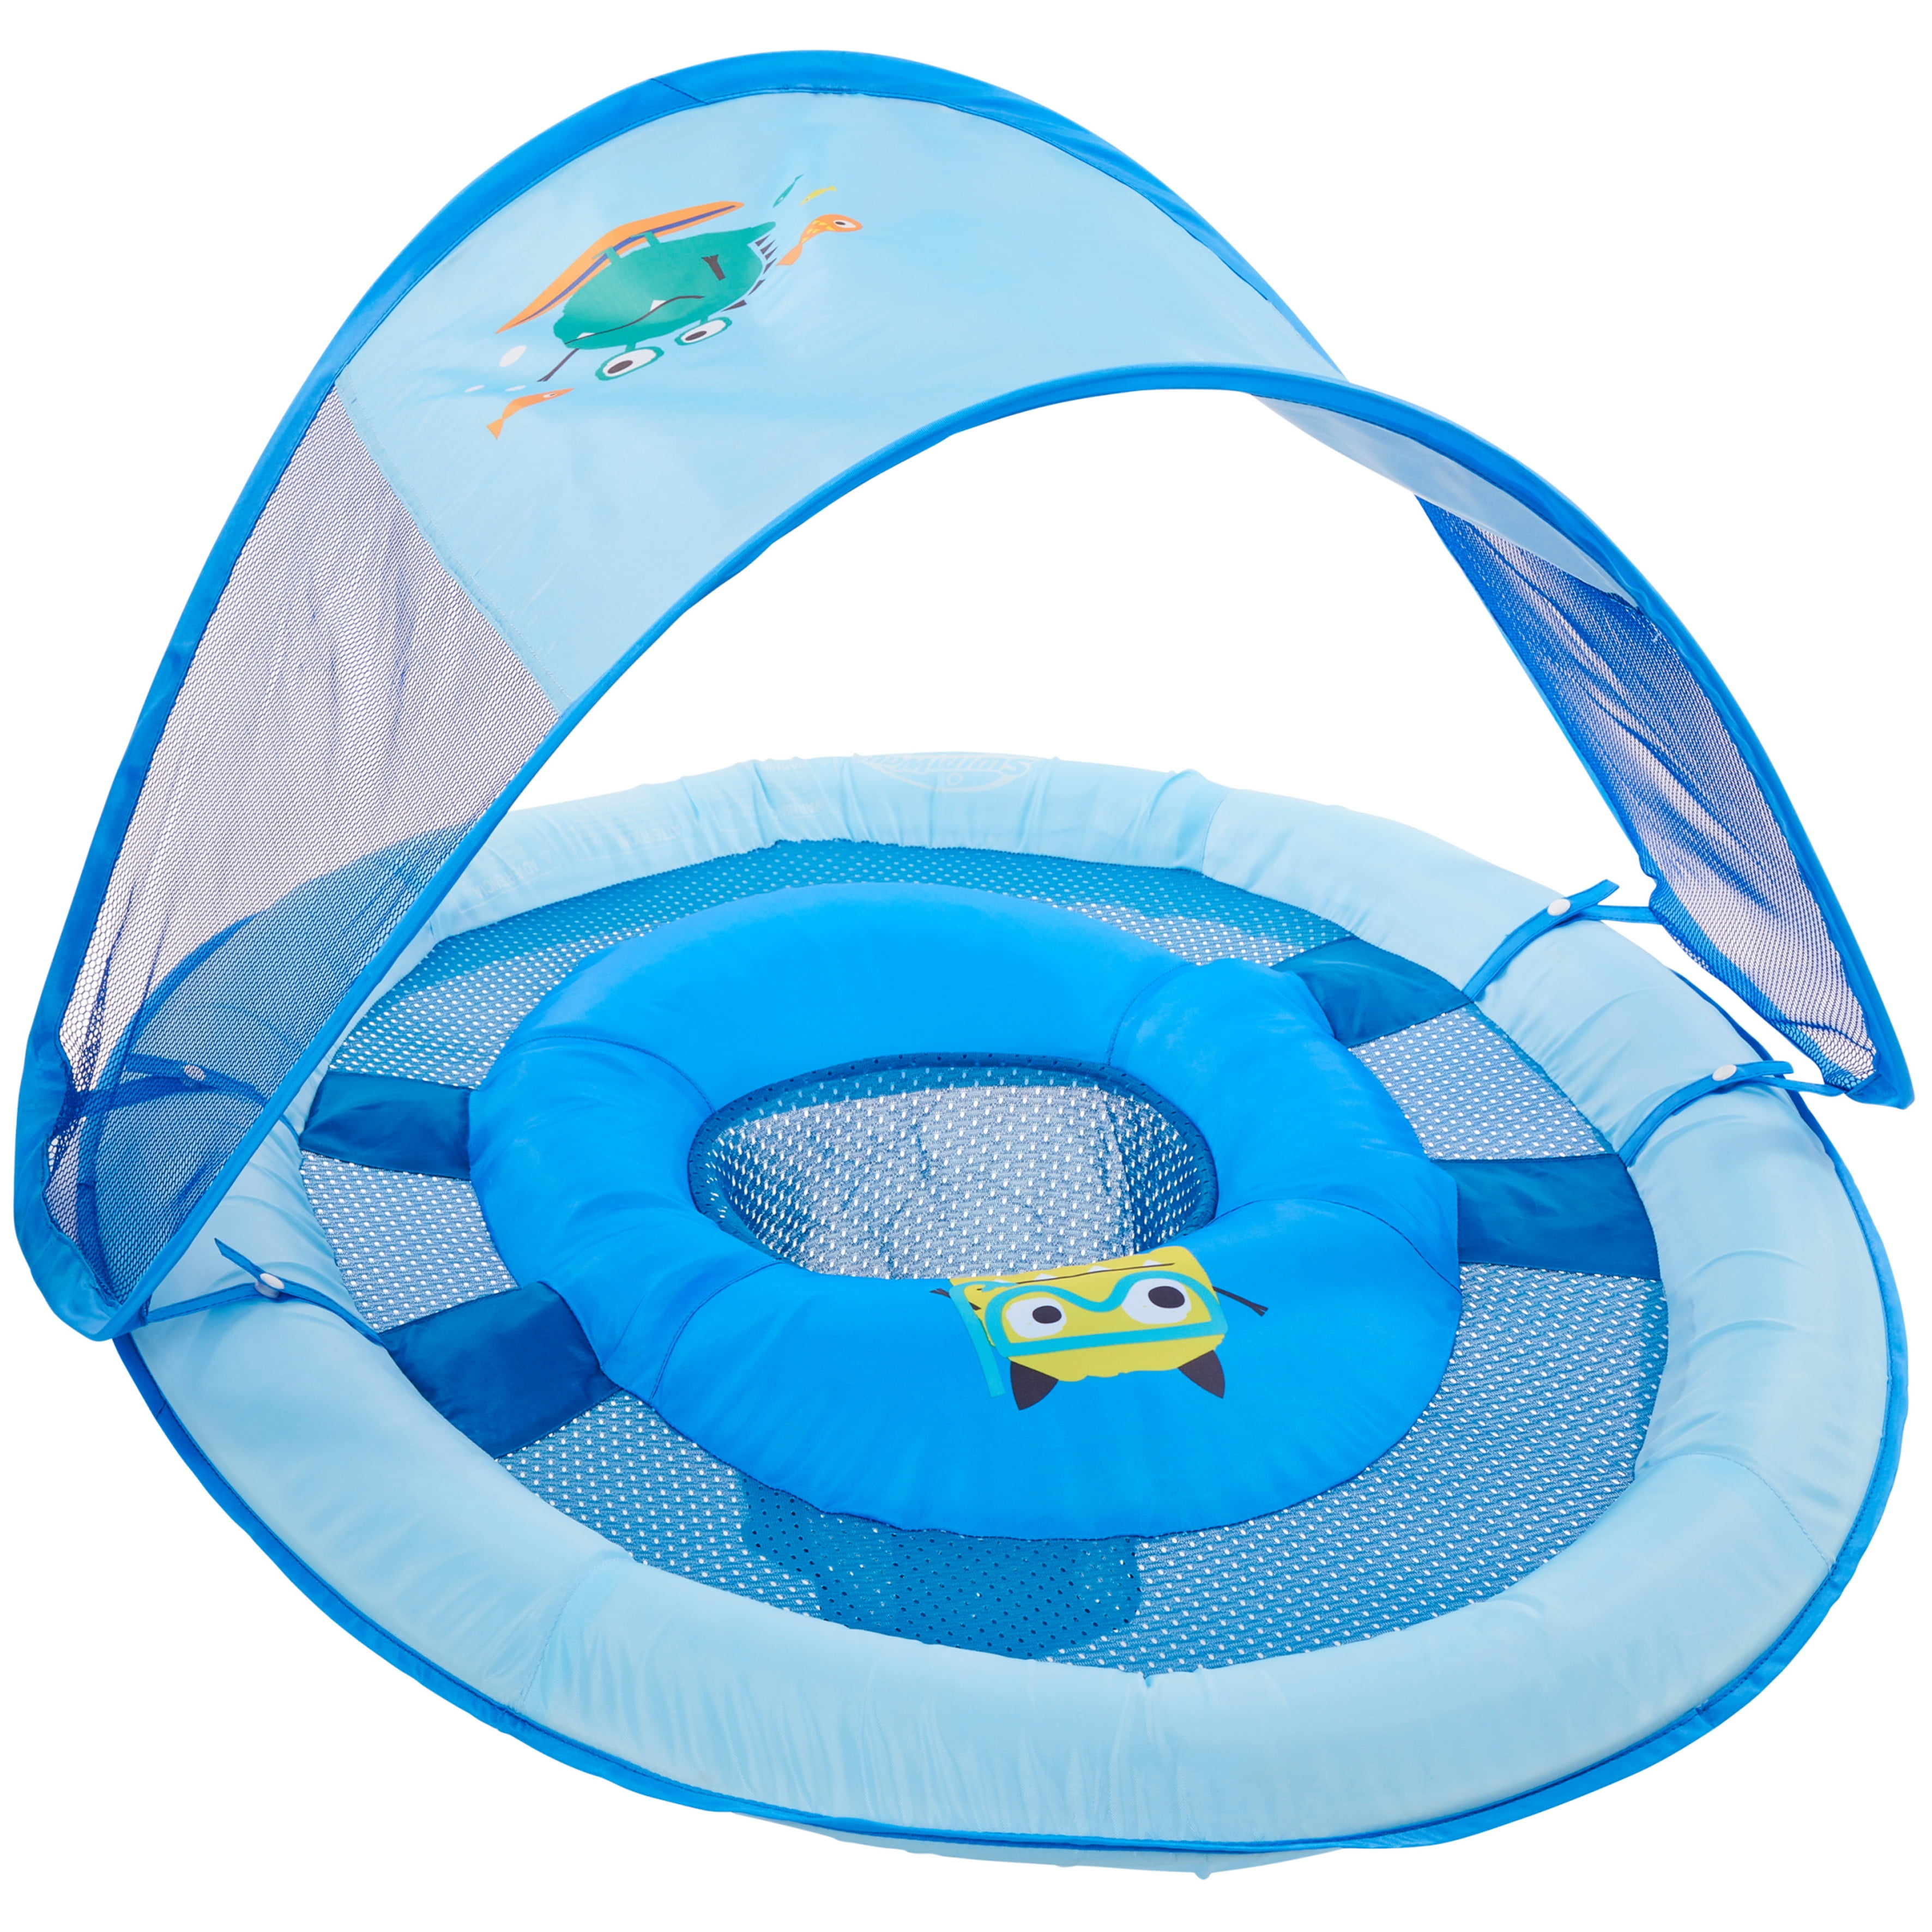 Toddler Baby Swim Ring Inflatable Float Kid Swimming Pool Water Seat with Canopy 